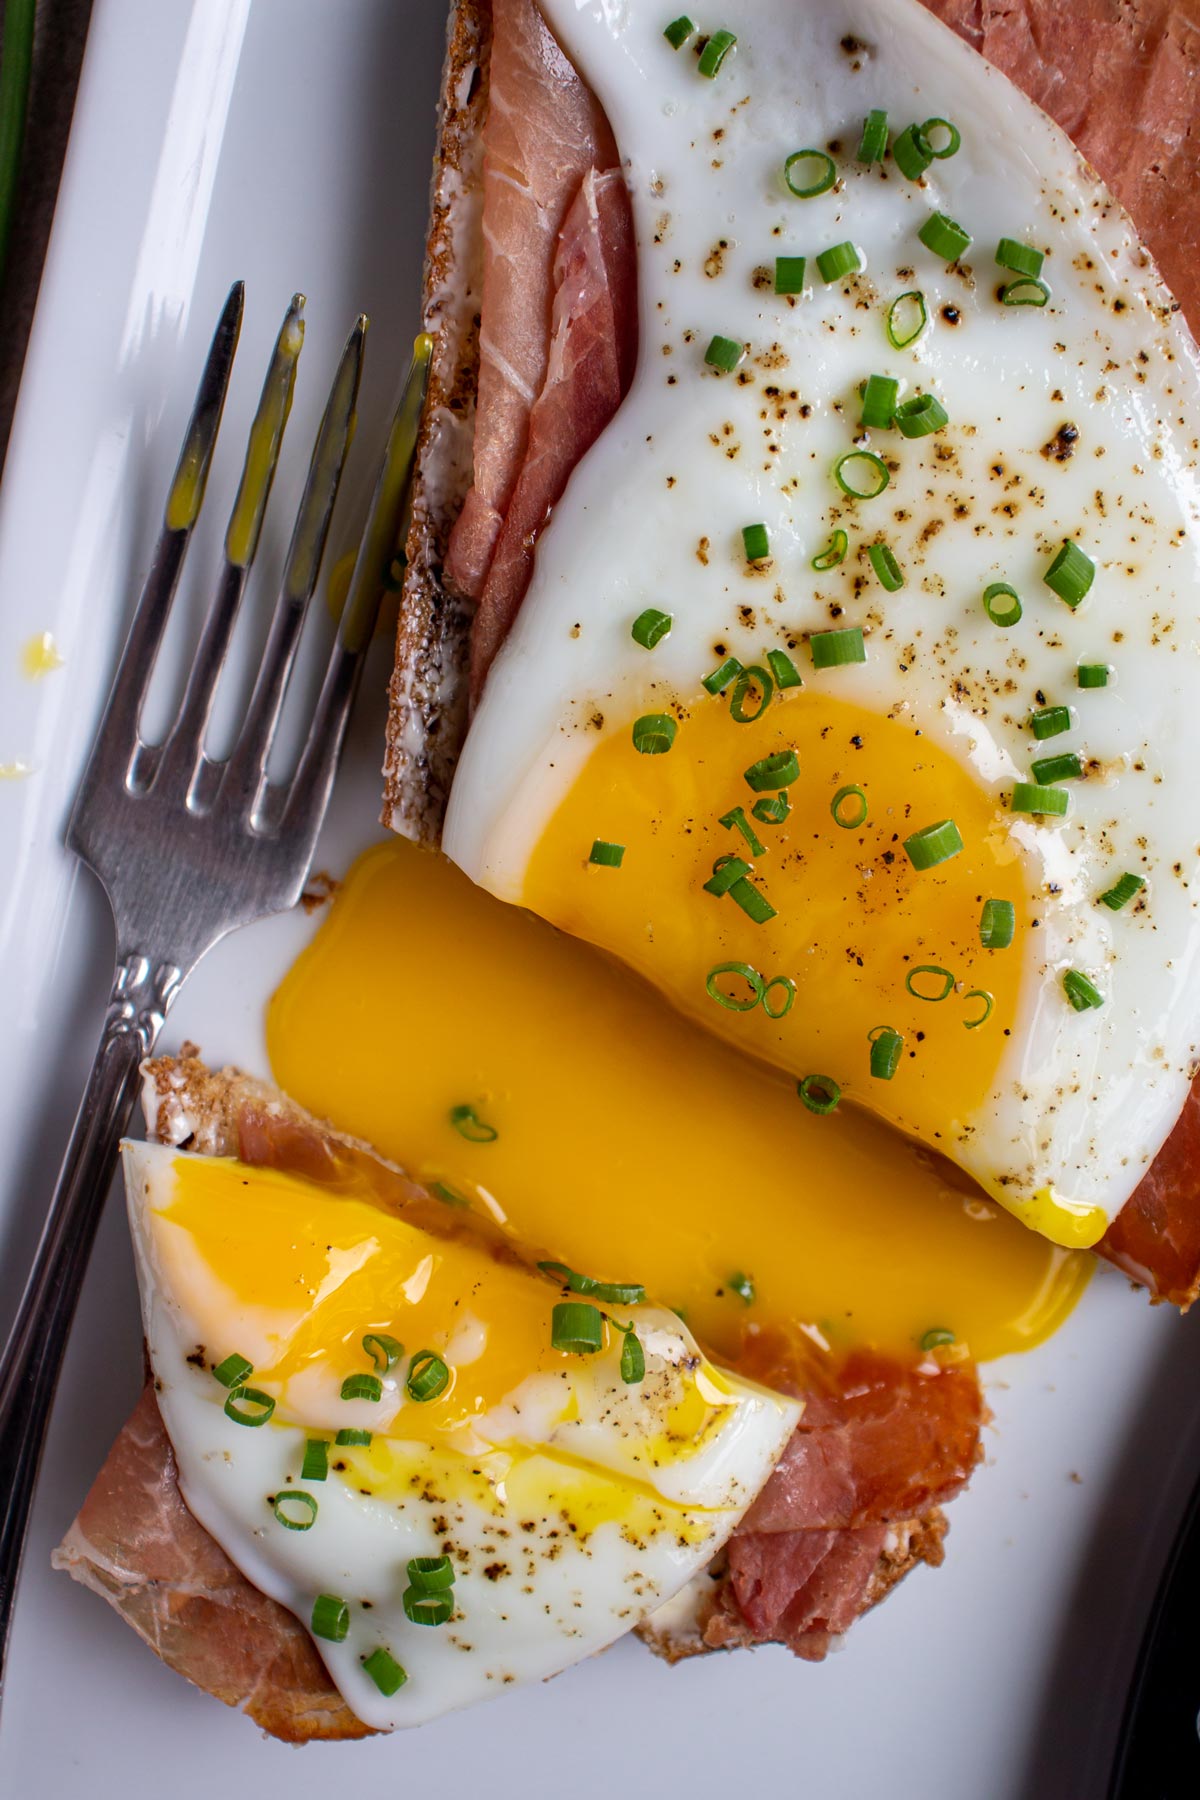 A sandwich topped with a fried egg, cut to release the egg yolk onto the plate.